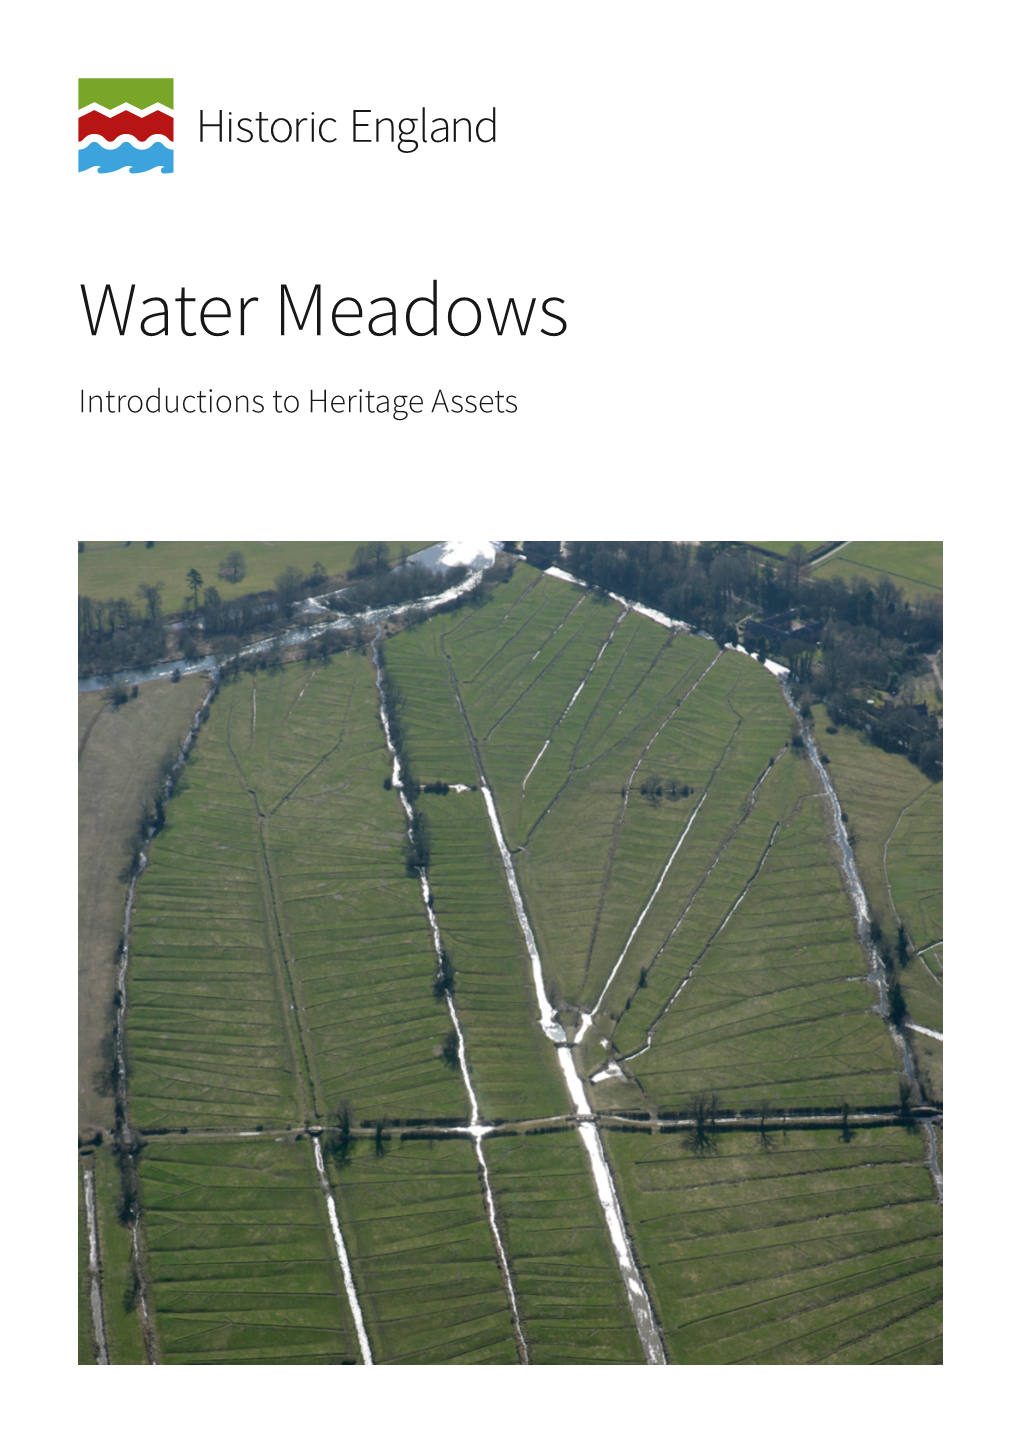 Introductions to Heritage Assets: Water Meadows